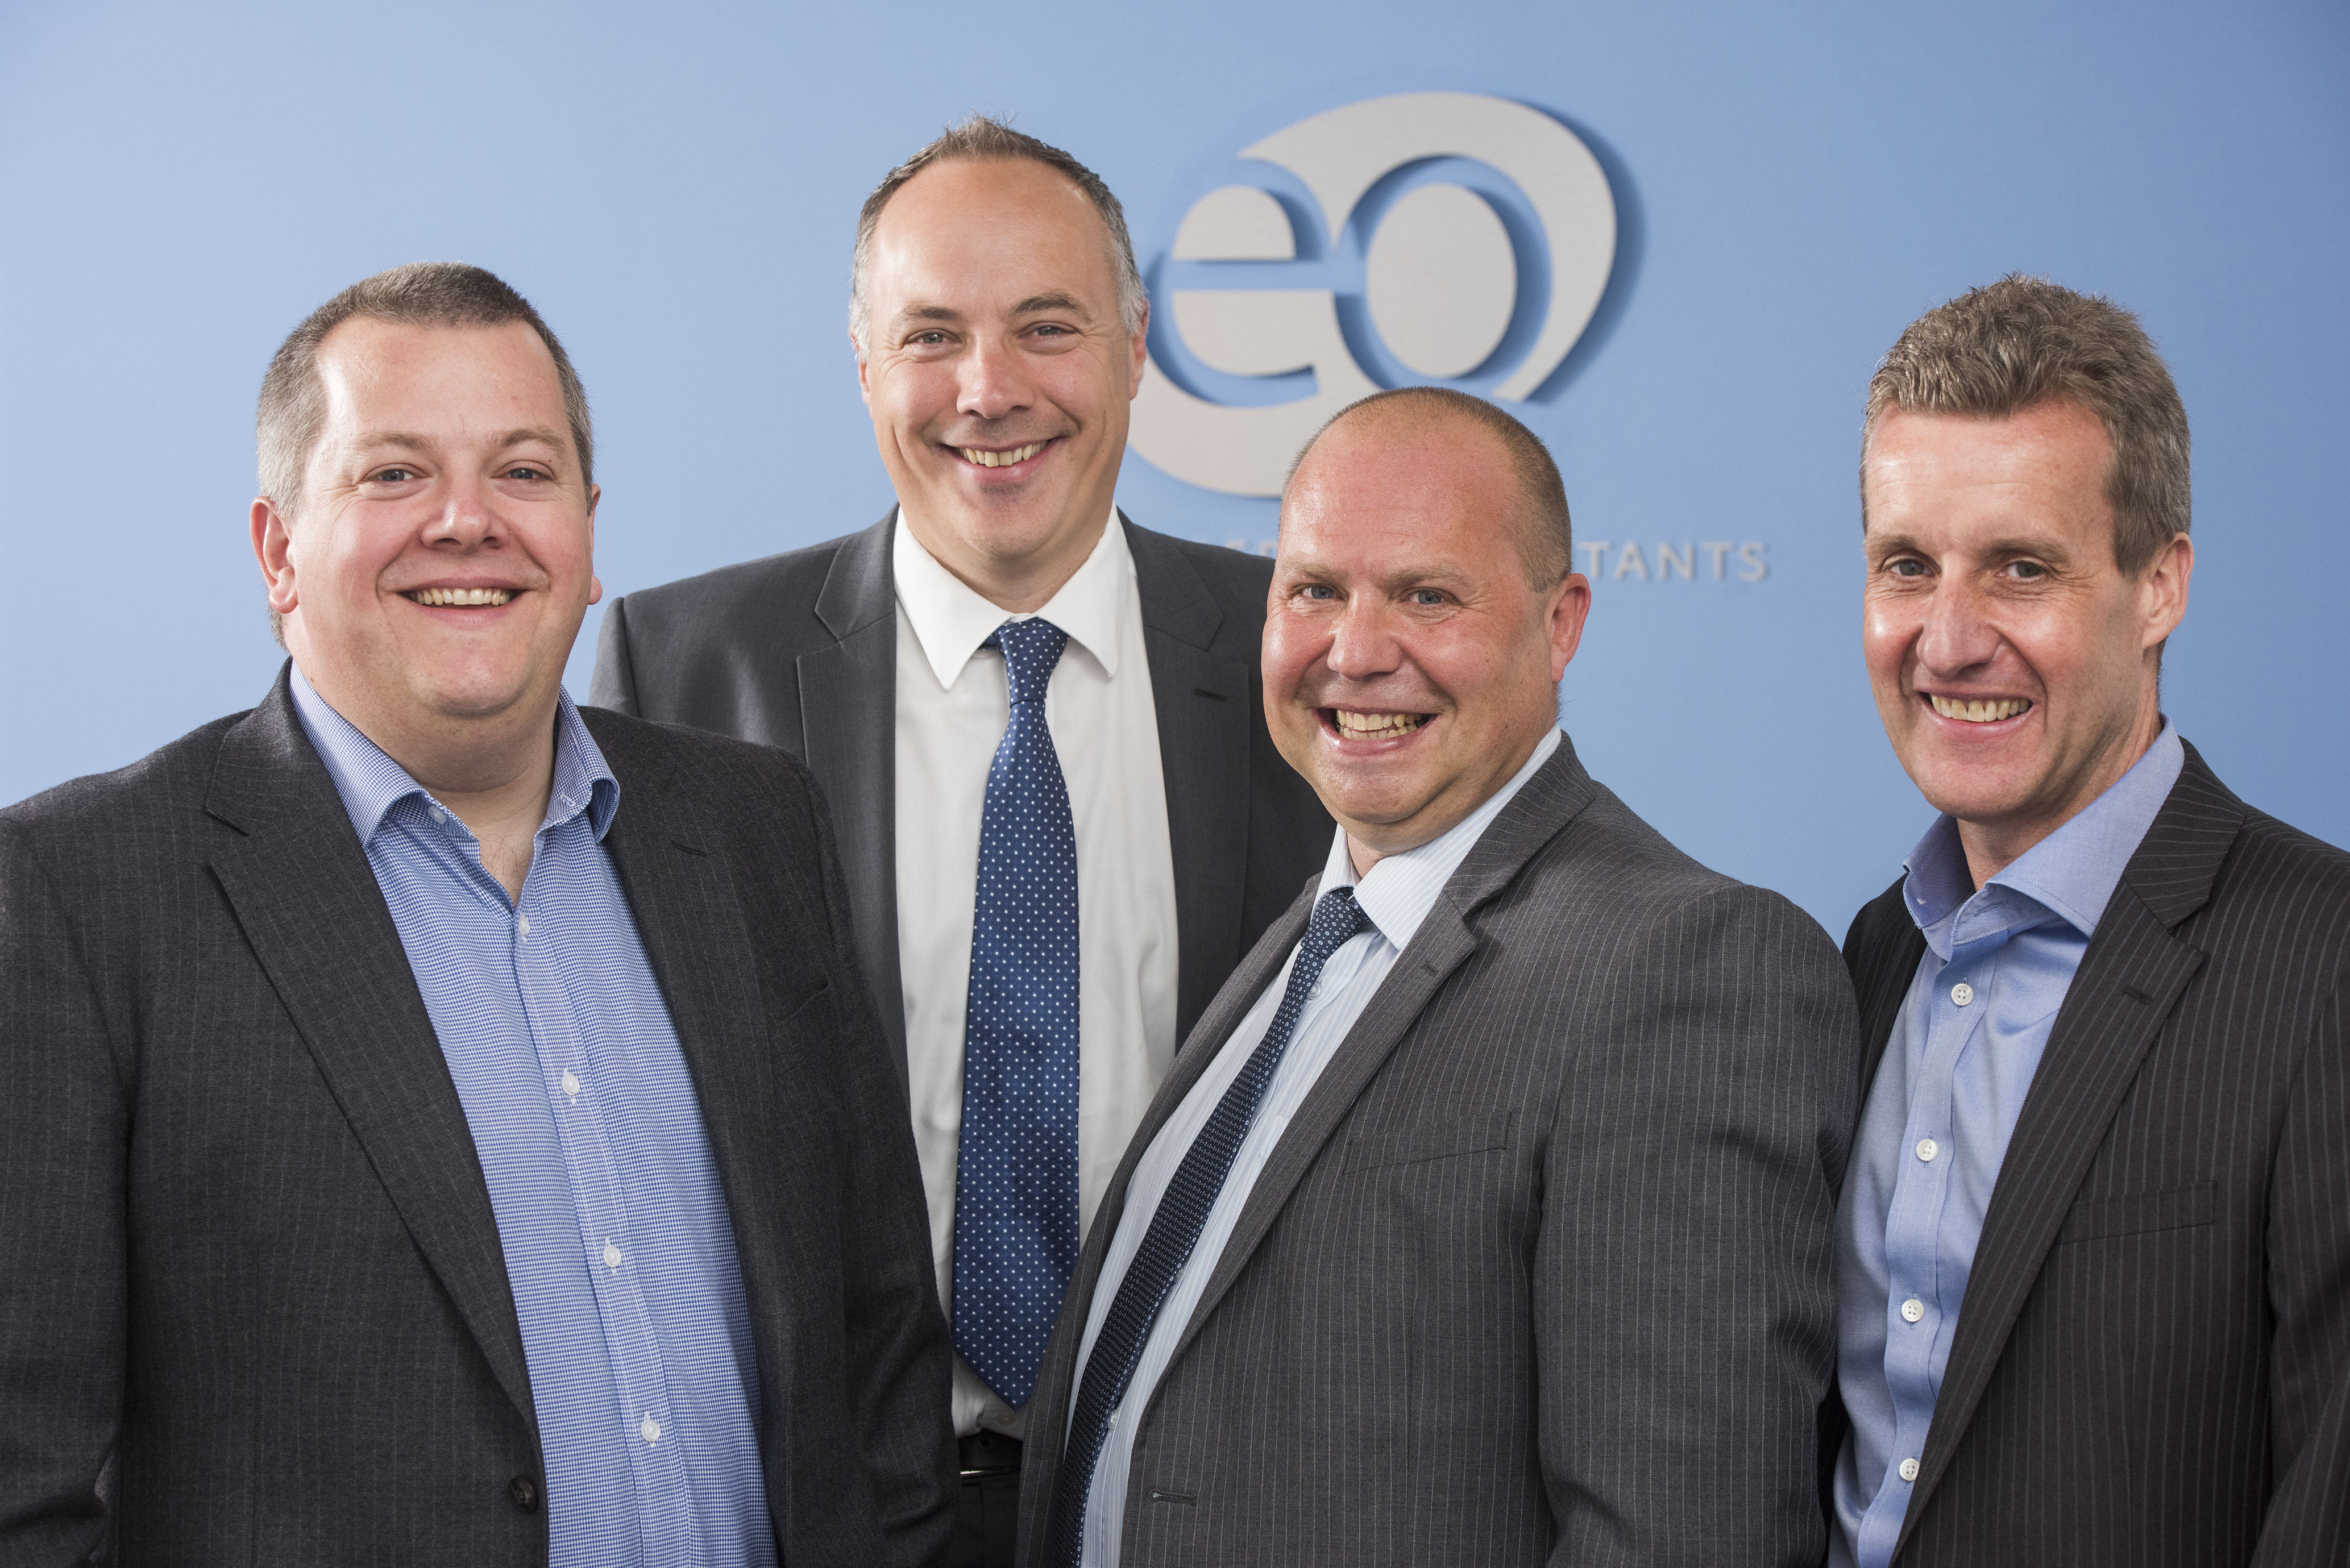 Bryan Johnston appointed as new EQ Accountants consultant